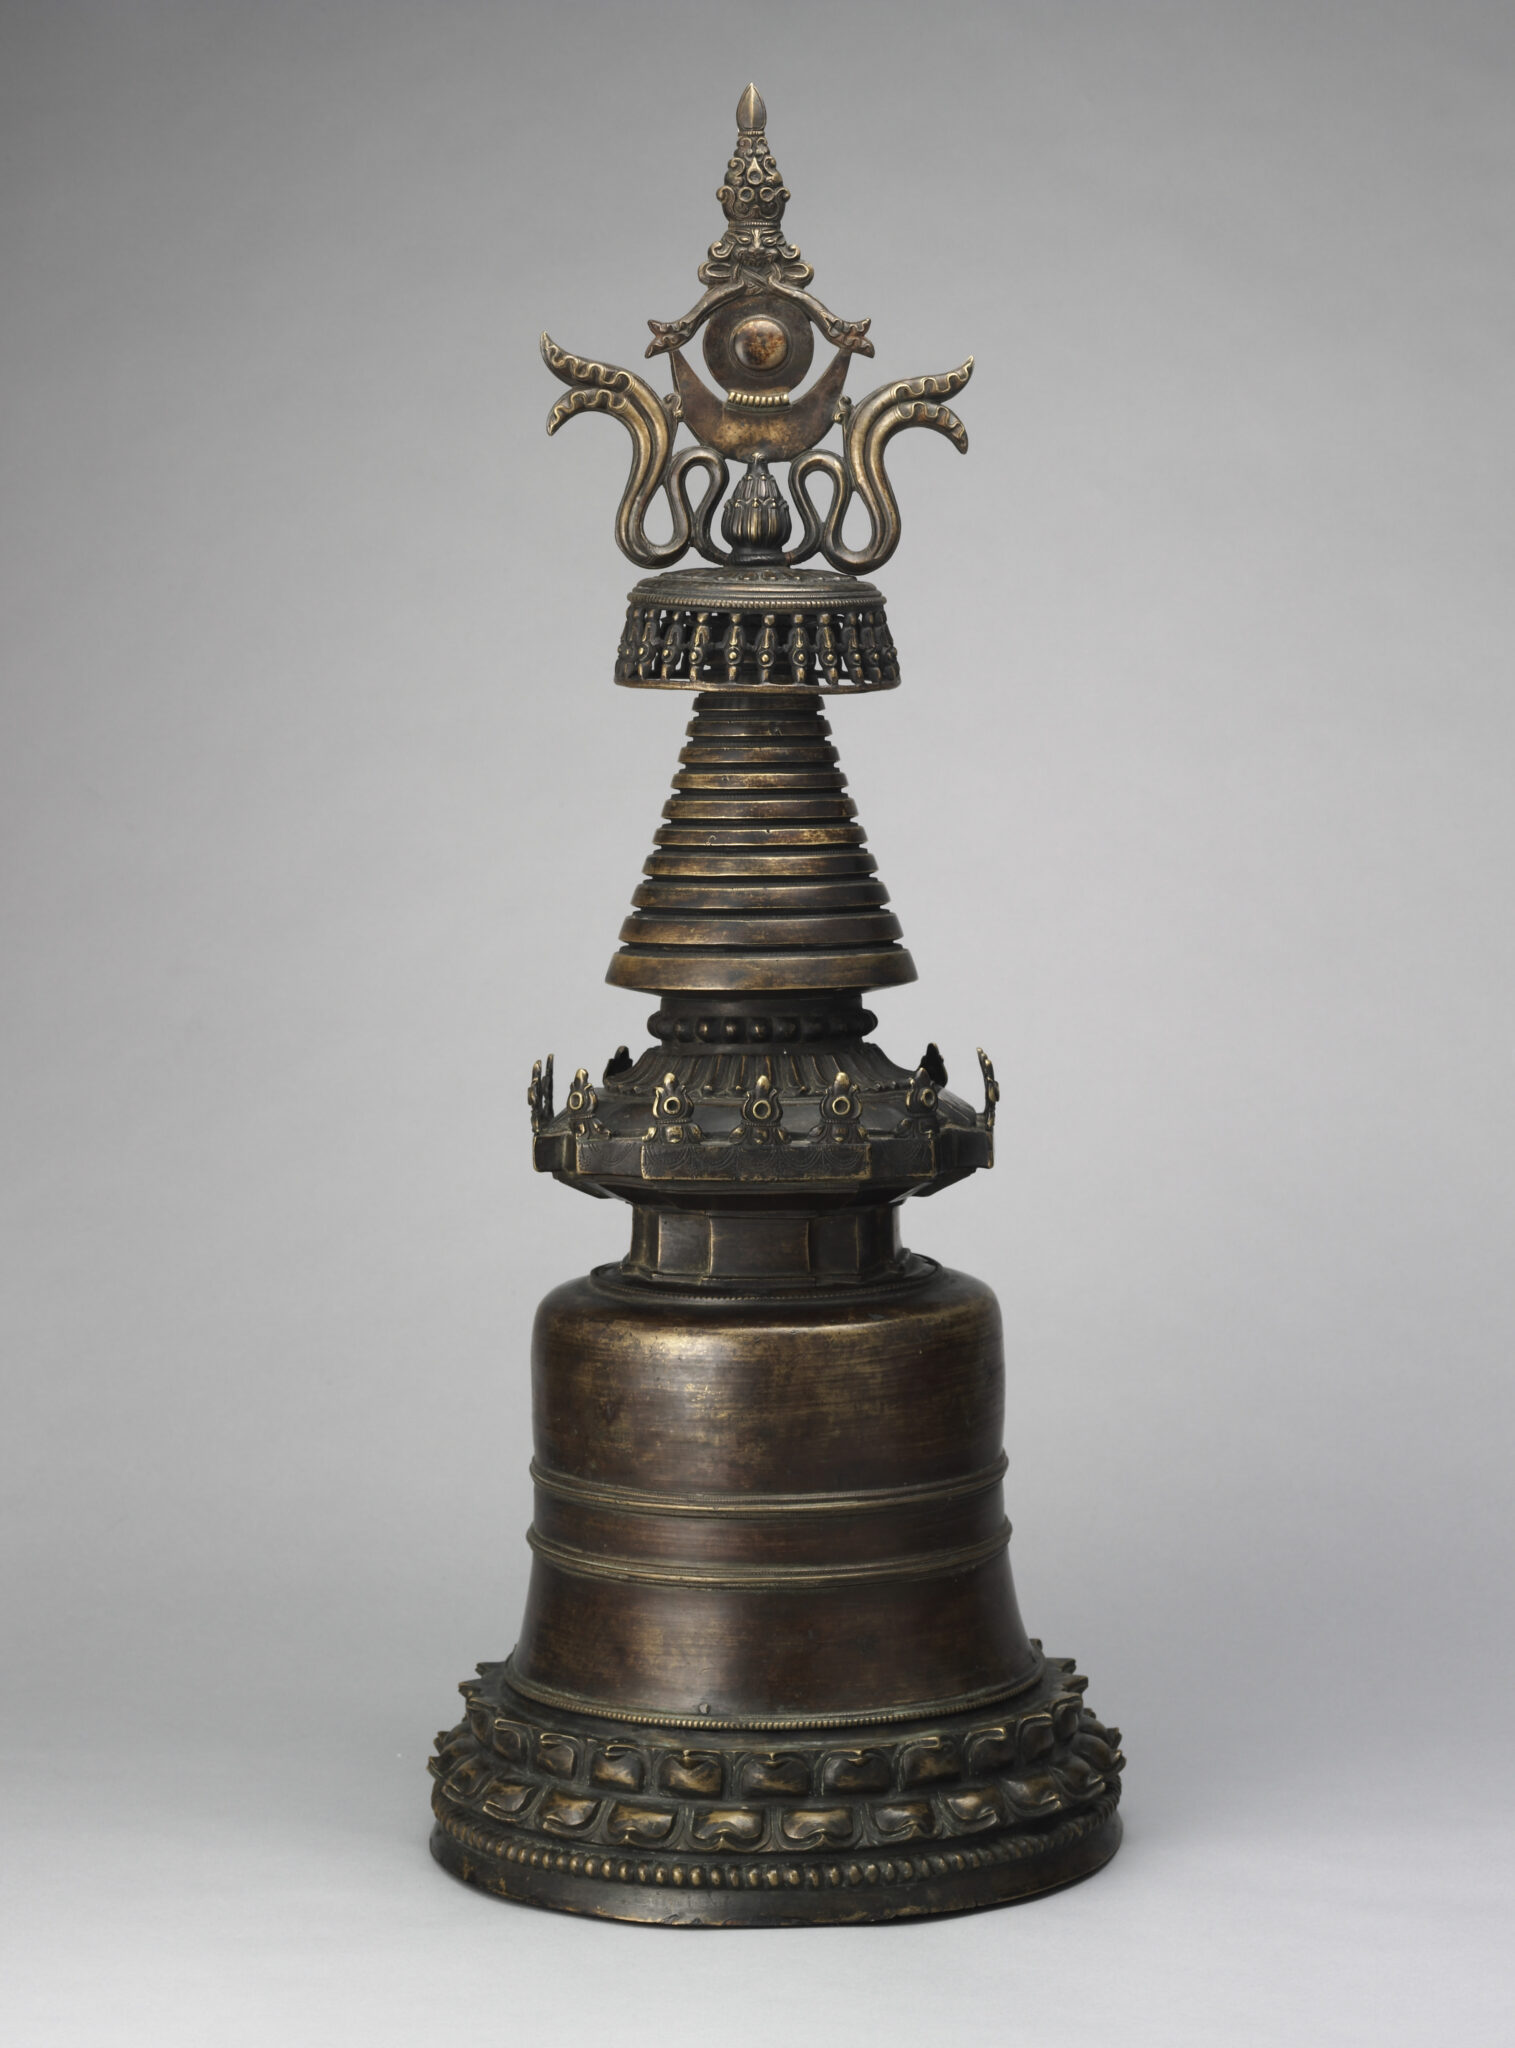 Patinated metal religious implement in shape of stupa resting on lotus pedestal featuring serpentine motif at apex